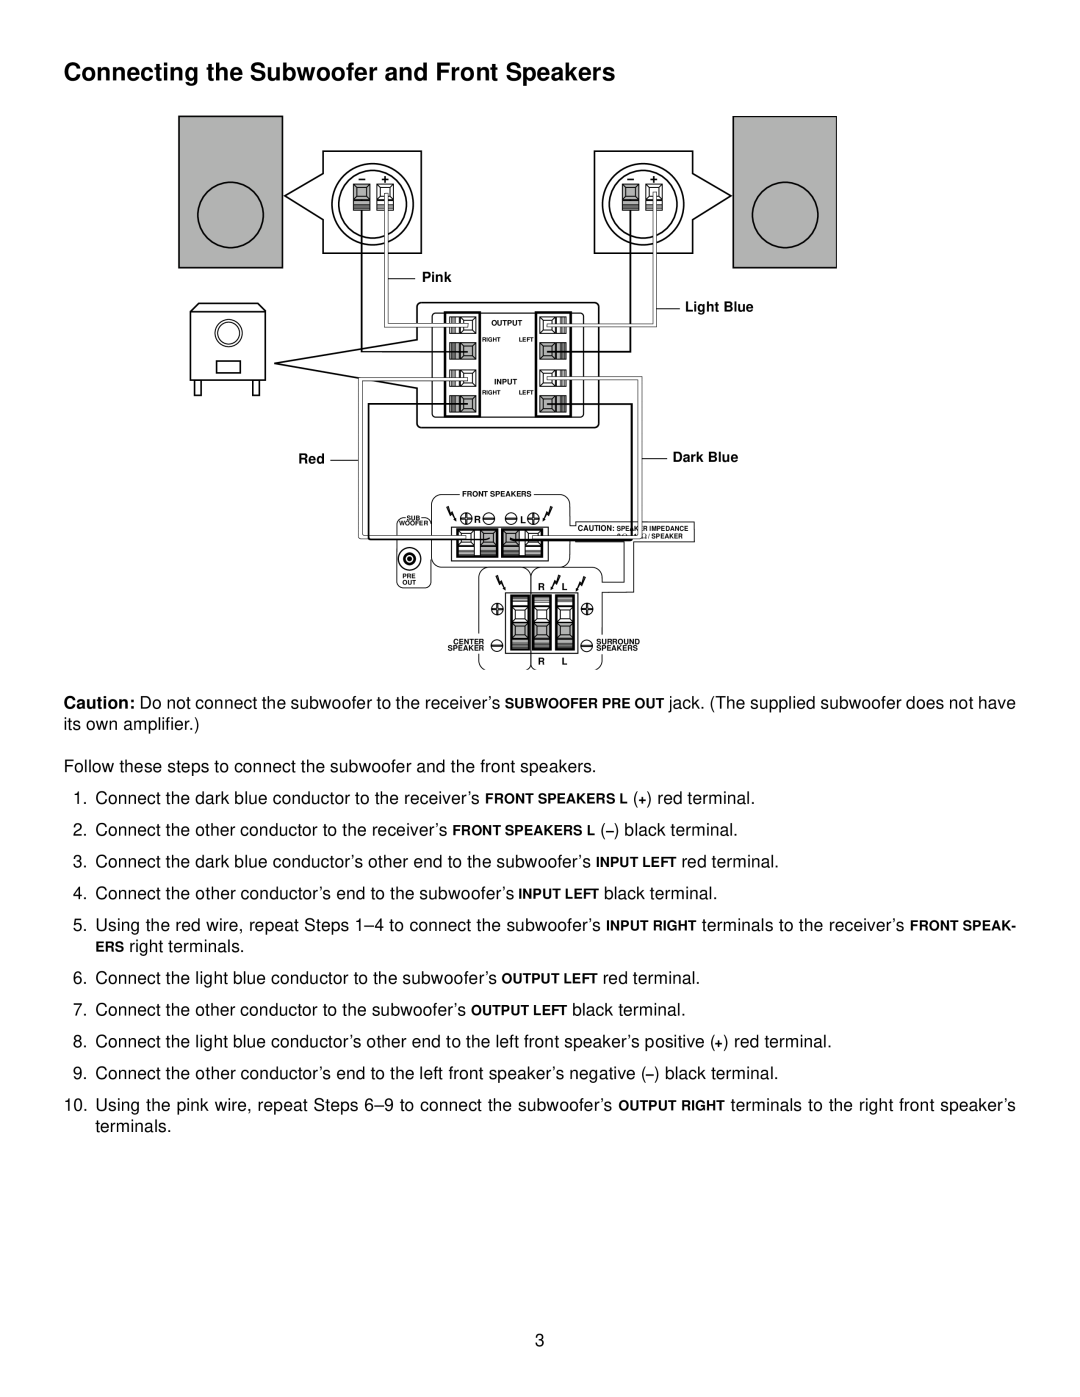 Optimus HTS-102 specifications Connecting the Subwoofer and Front Speakers 